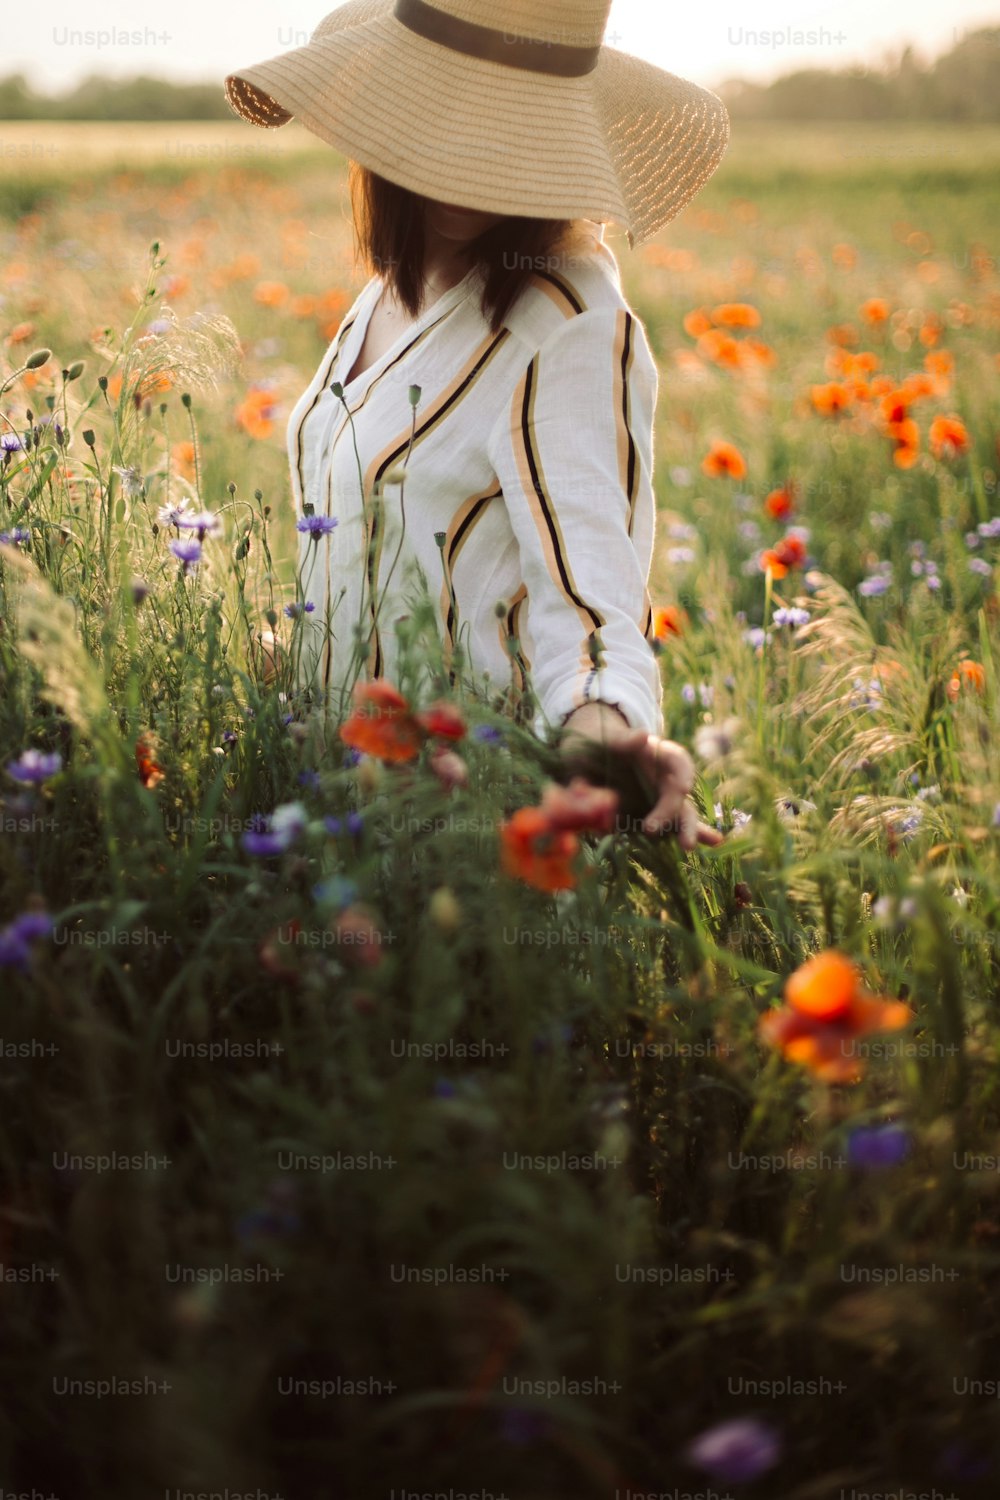 Stylish girl in hat walking in wildflowers in sunset light in summer meadow. Young woman in linen dress walking among poppy and cornflowers in countryside. Rural slow life. Enjoying simple life